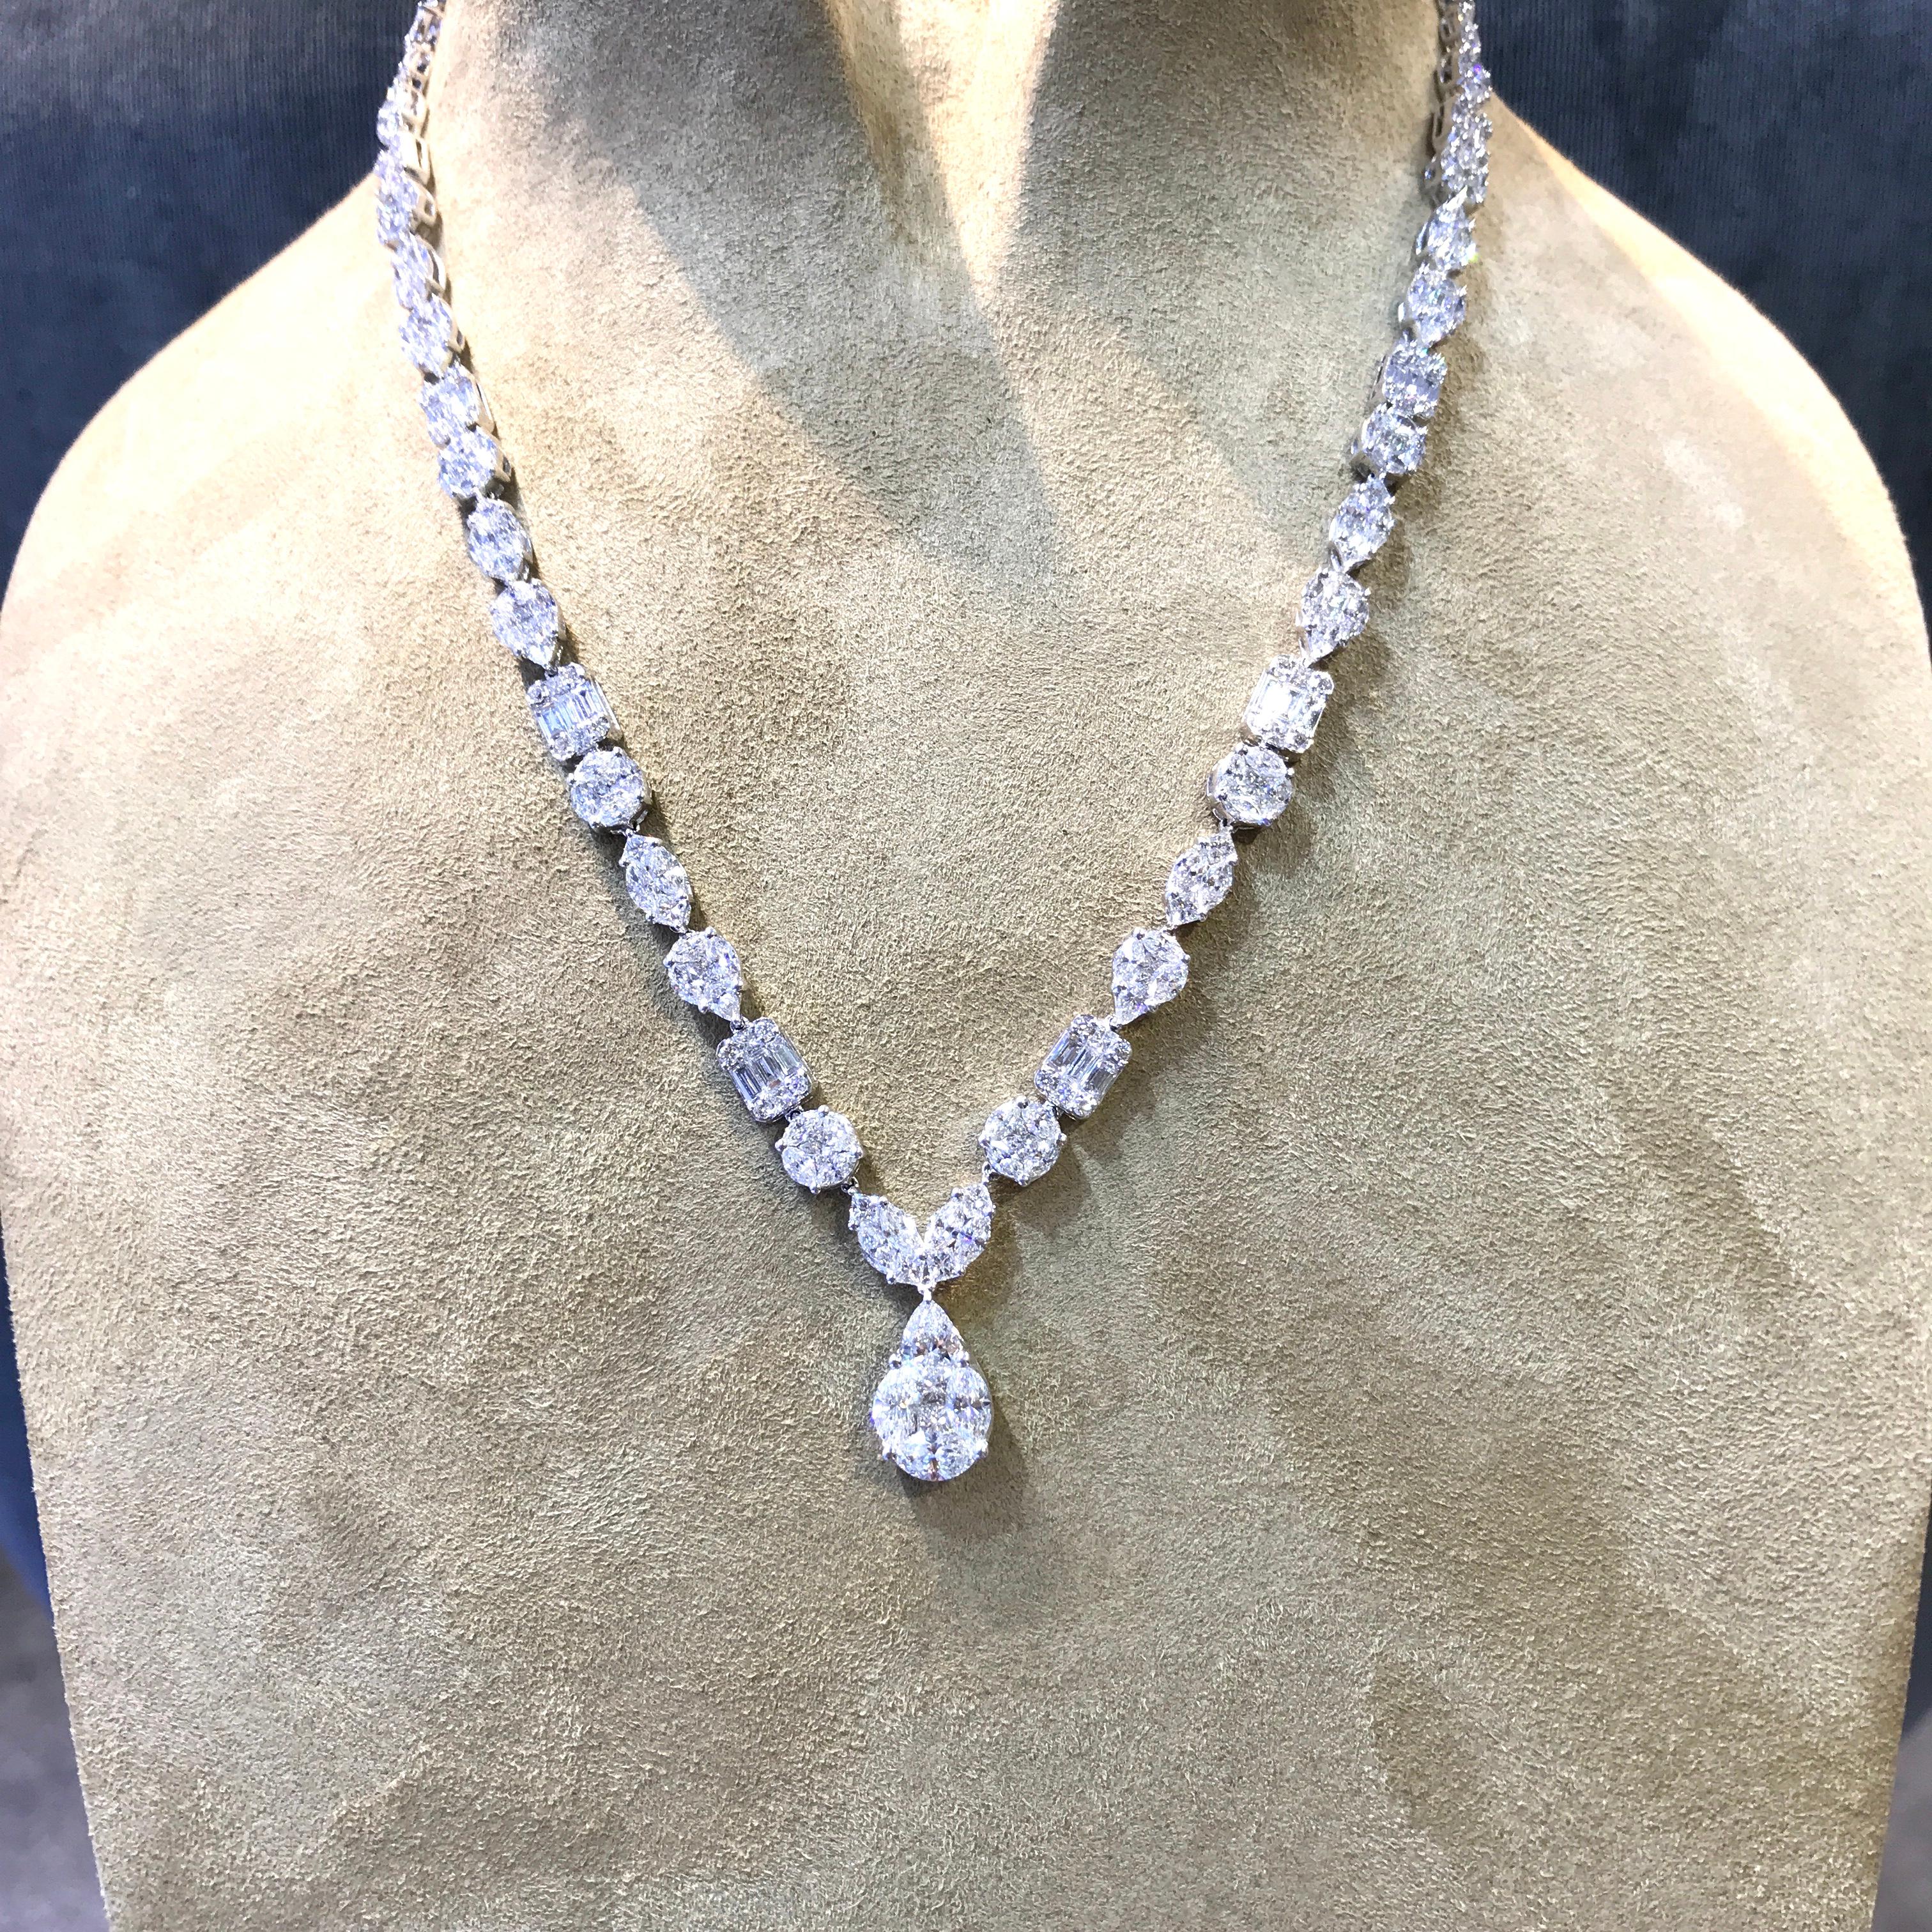 Glamour drops collection - glamour is a sense of luxury , GiLIN 's master craftsmen have set the white diamonds at different angles to form a beautiful necklace with different size diamond drops . The setting maximize the fire and brilliance . It's